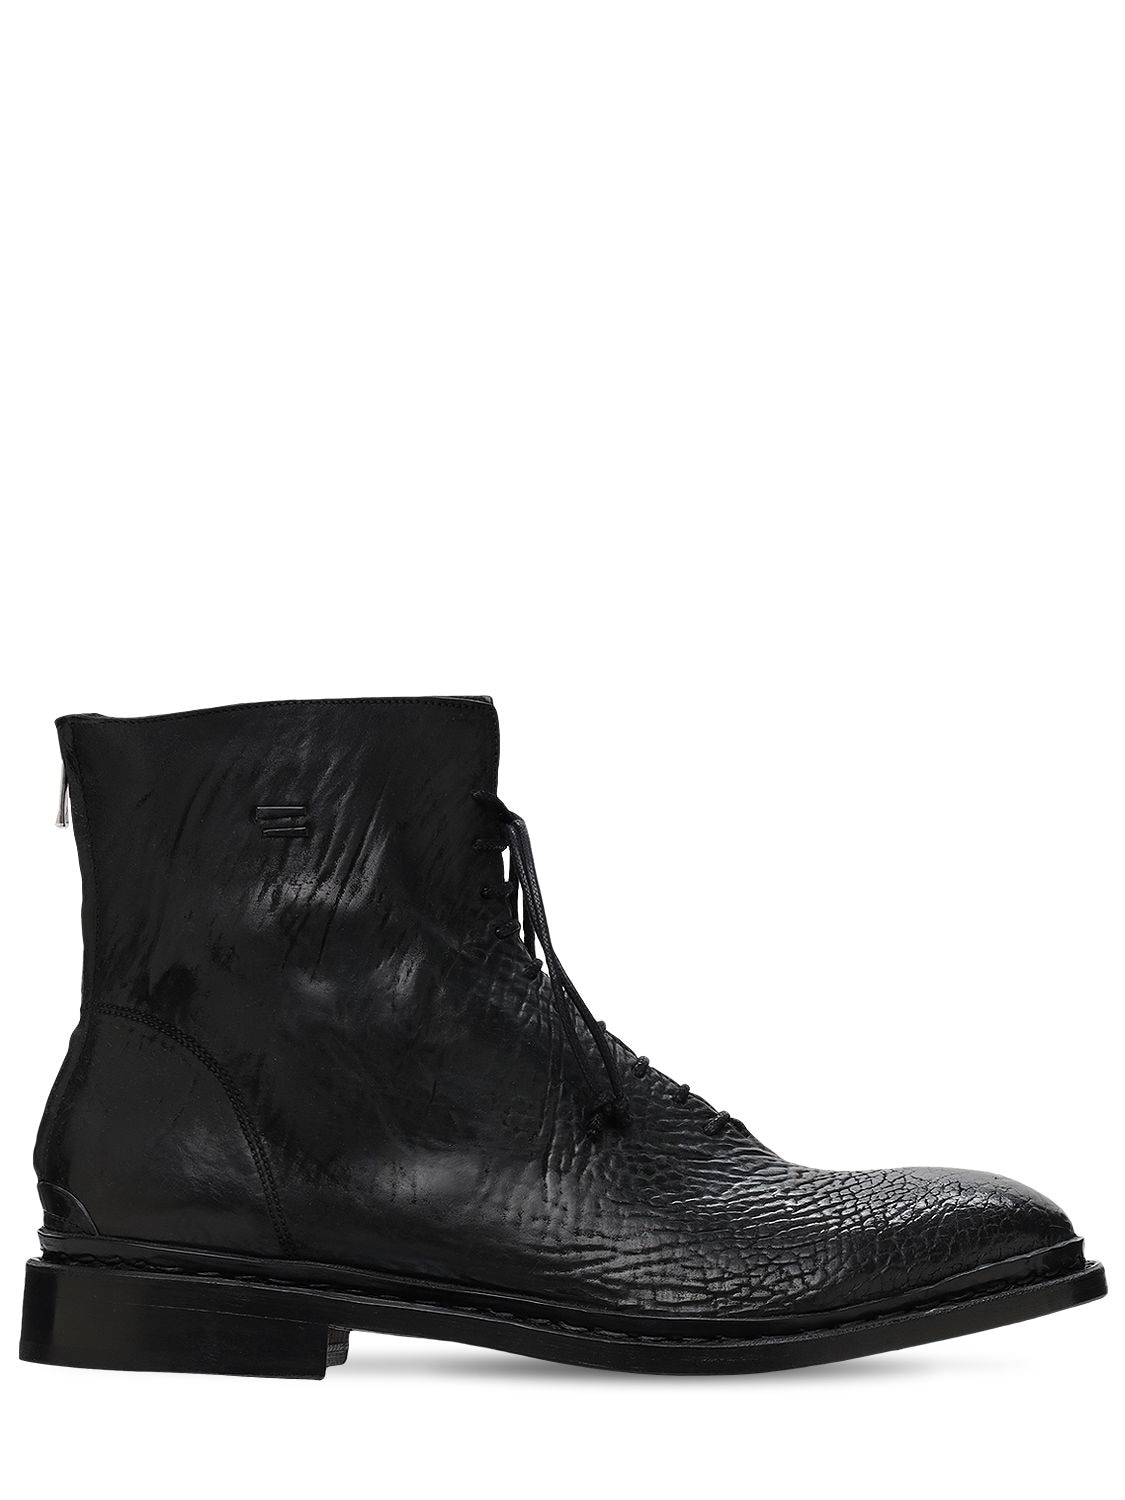 The Last Conspiracy Destroyed Reverse Leather Boots In Black